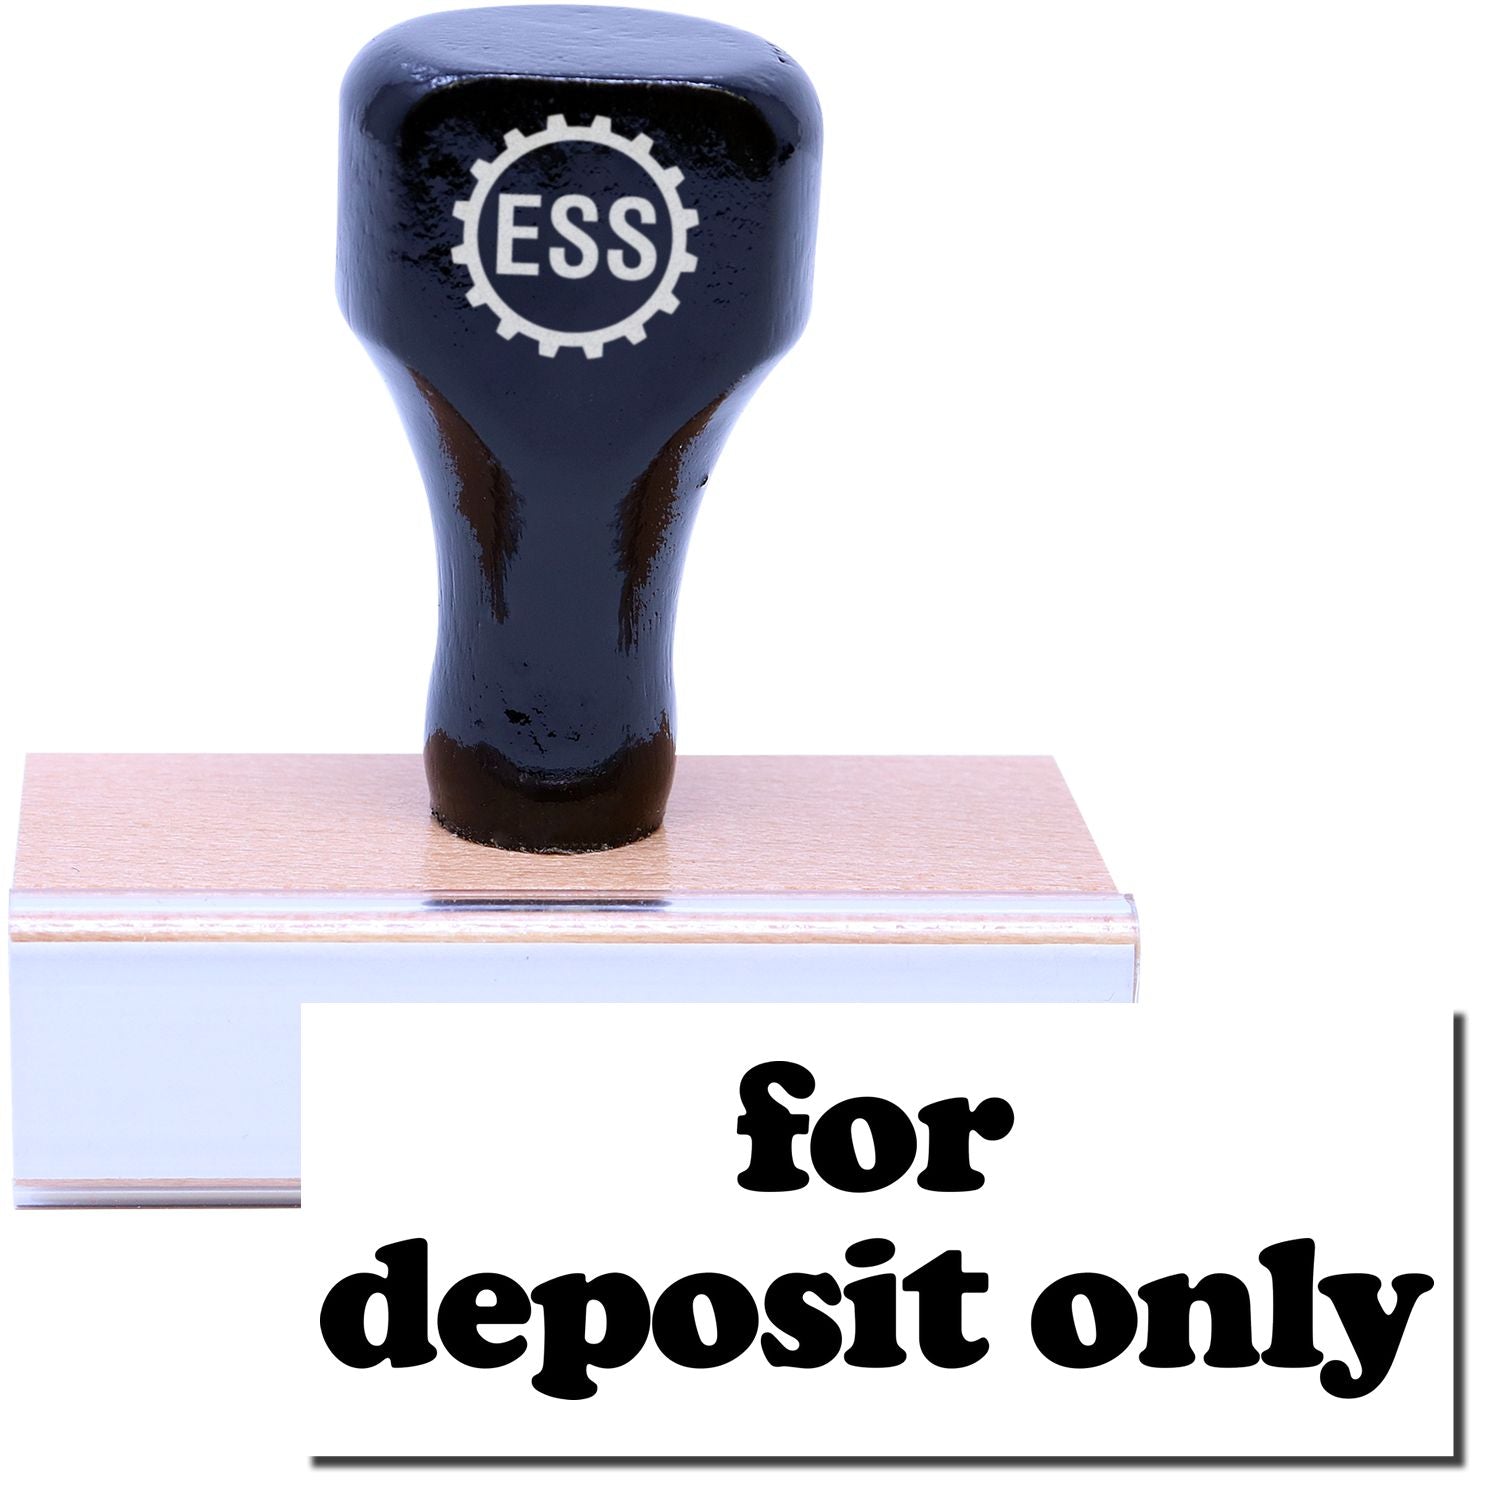 A stock office rubber stamp with a stamped image showing how the text "for deposit only" in lowercase letters is displayed after stamping.